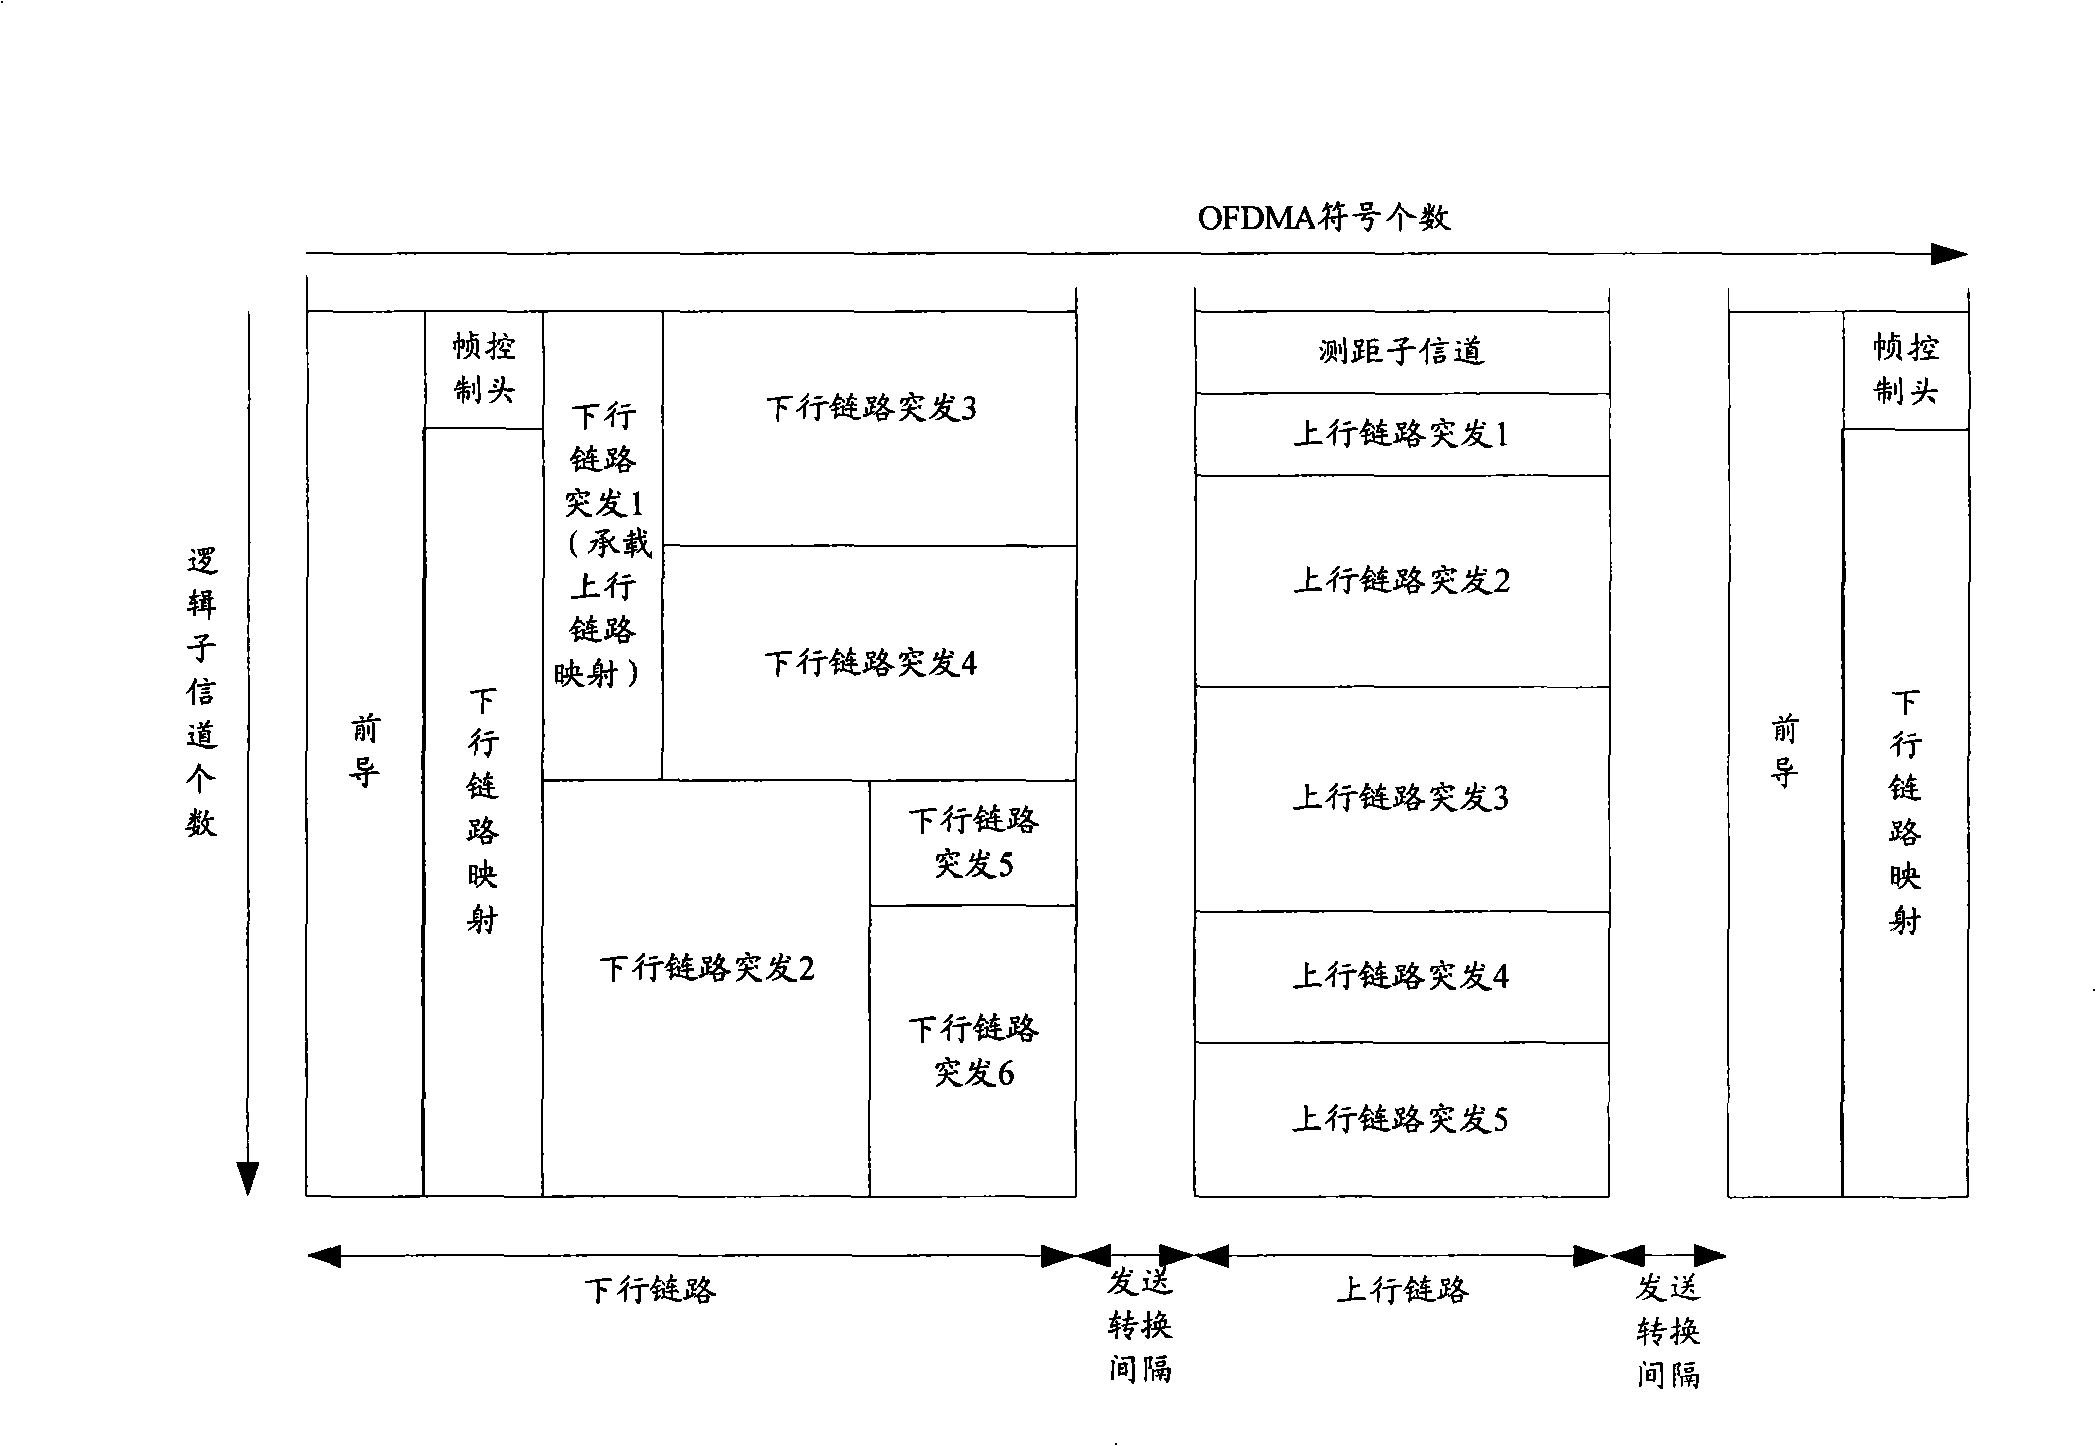 Distance measuring signal transmitting method, system and apparatus in OFDM system